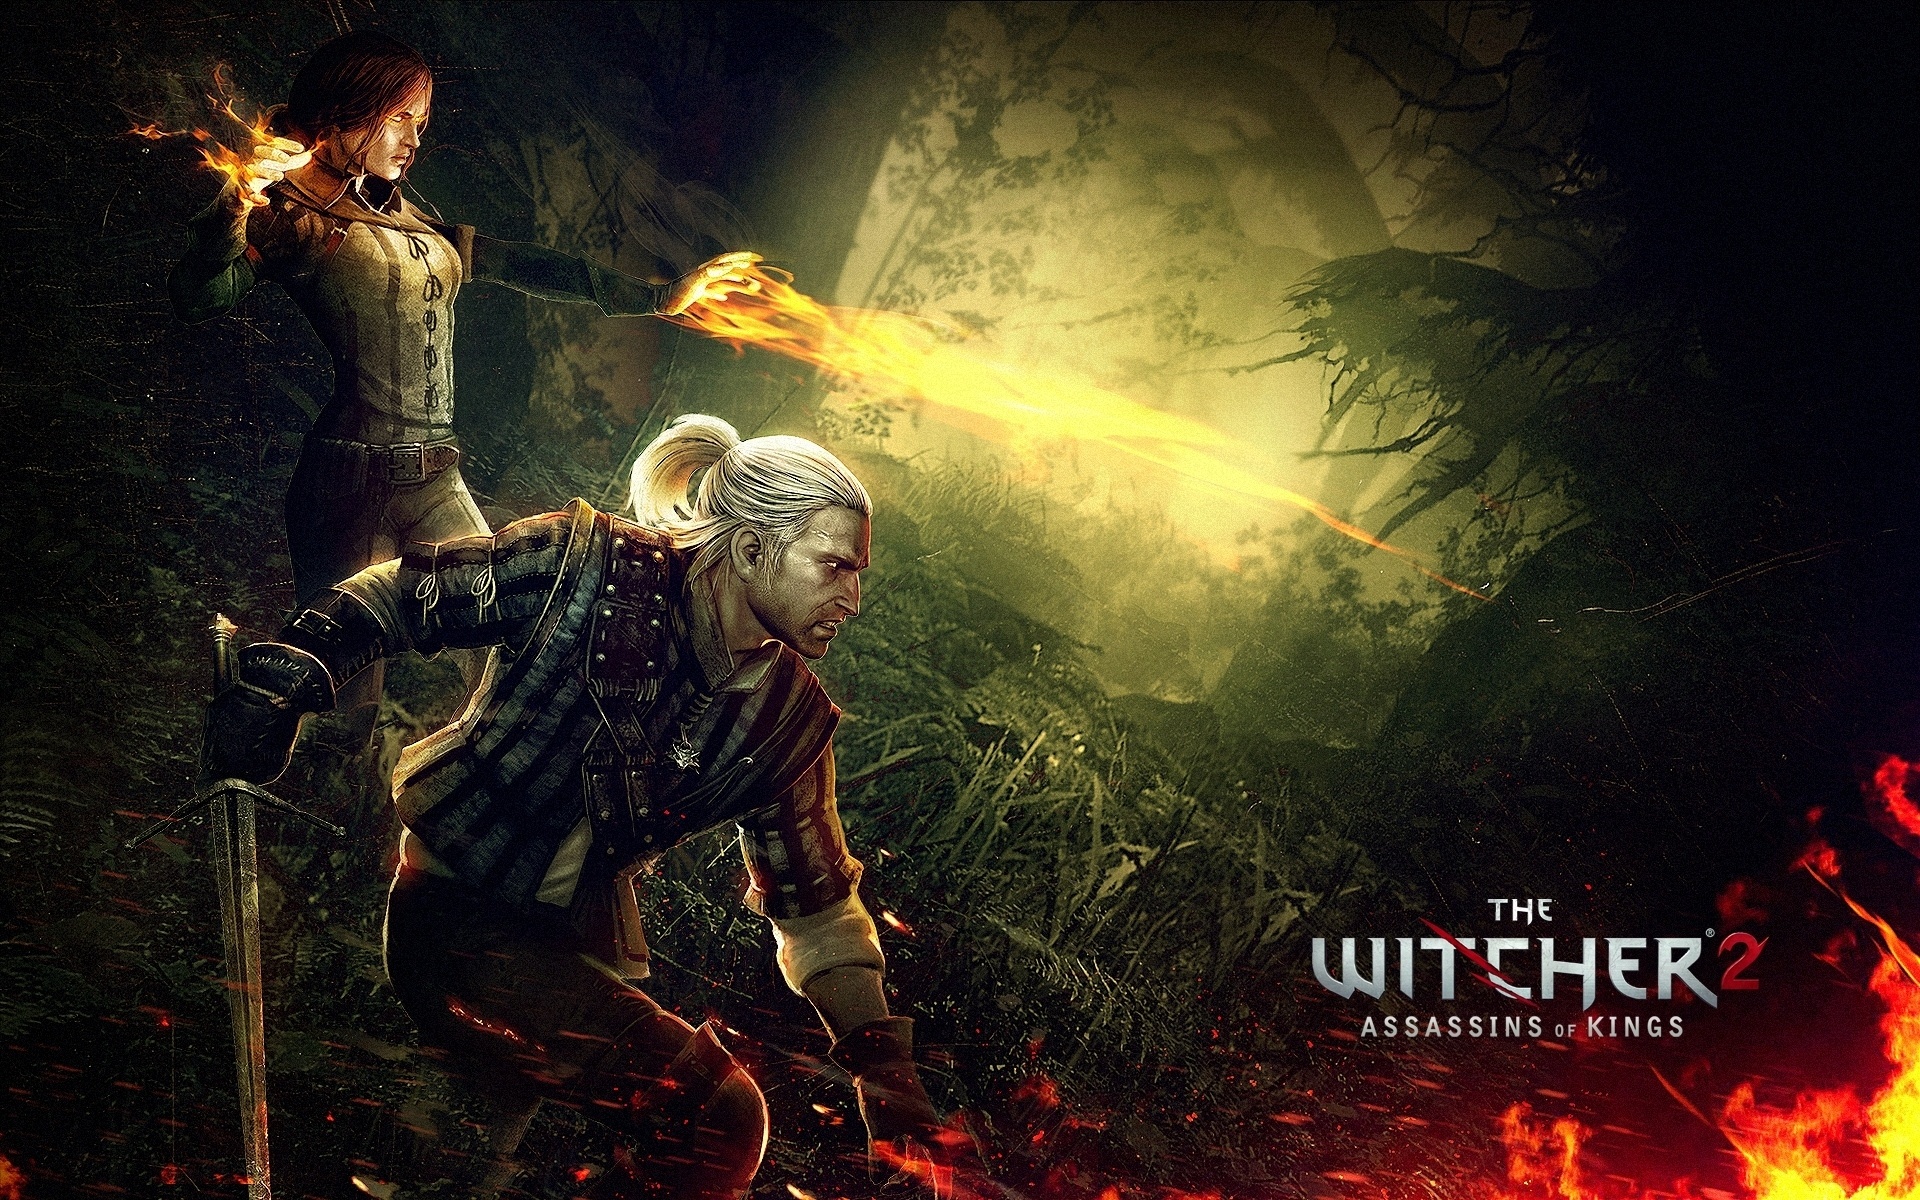 The Witcher 2 Wallpapers The Witcher 2 Backgrounds The Witcher 2 1920x1200